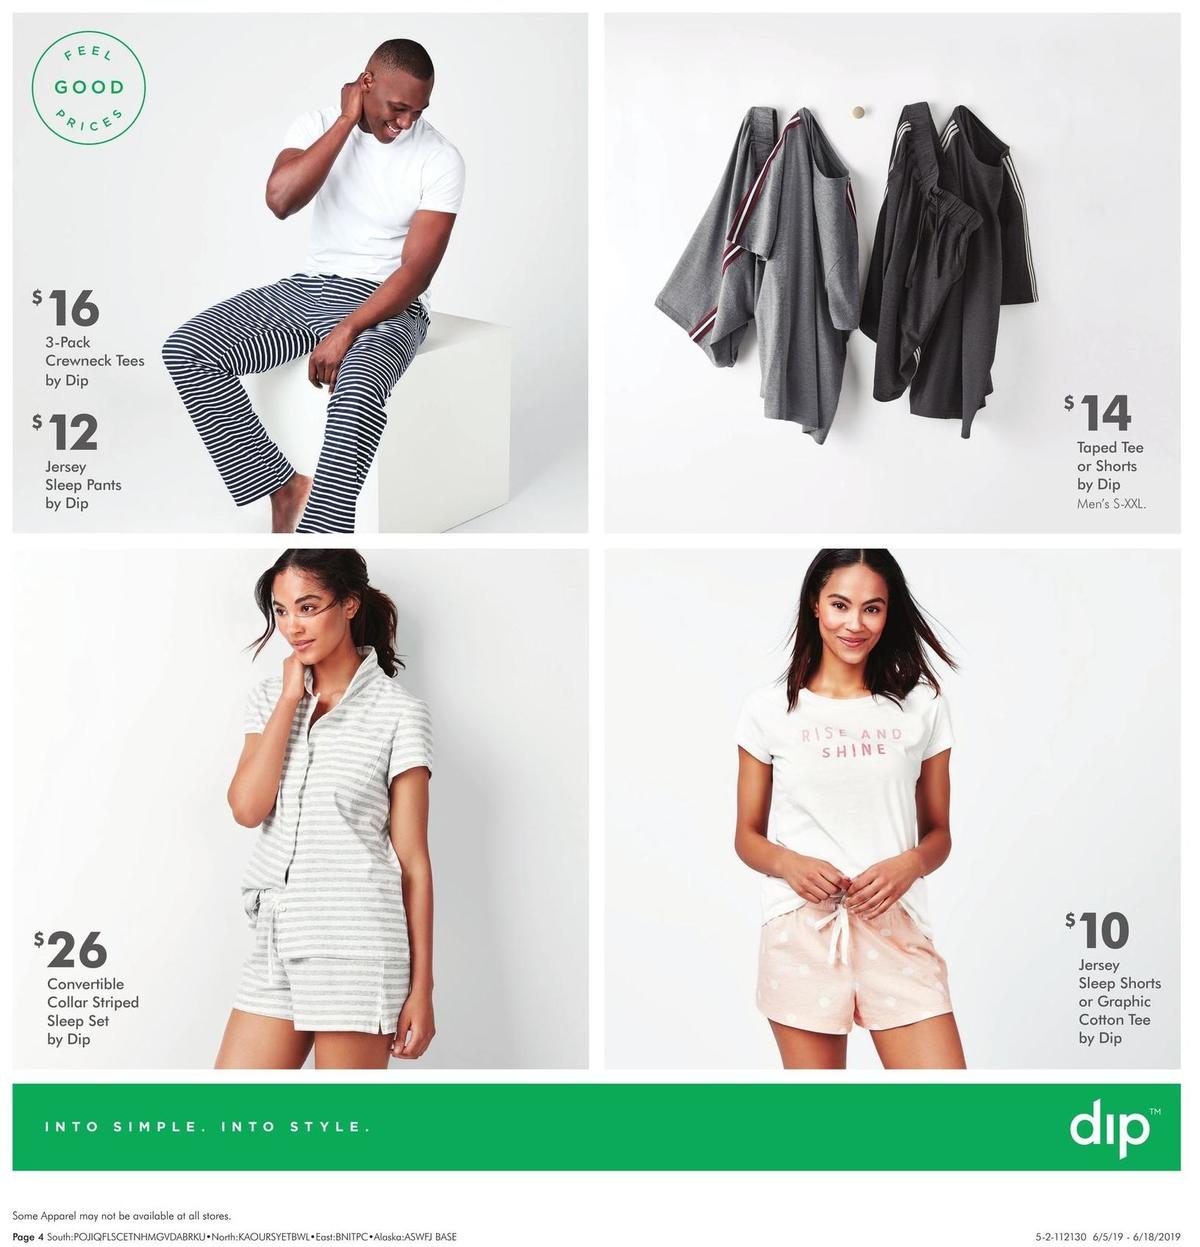 Fred Meyer Dip Apparel Weekly Ad from June 5